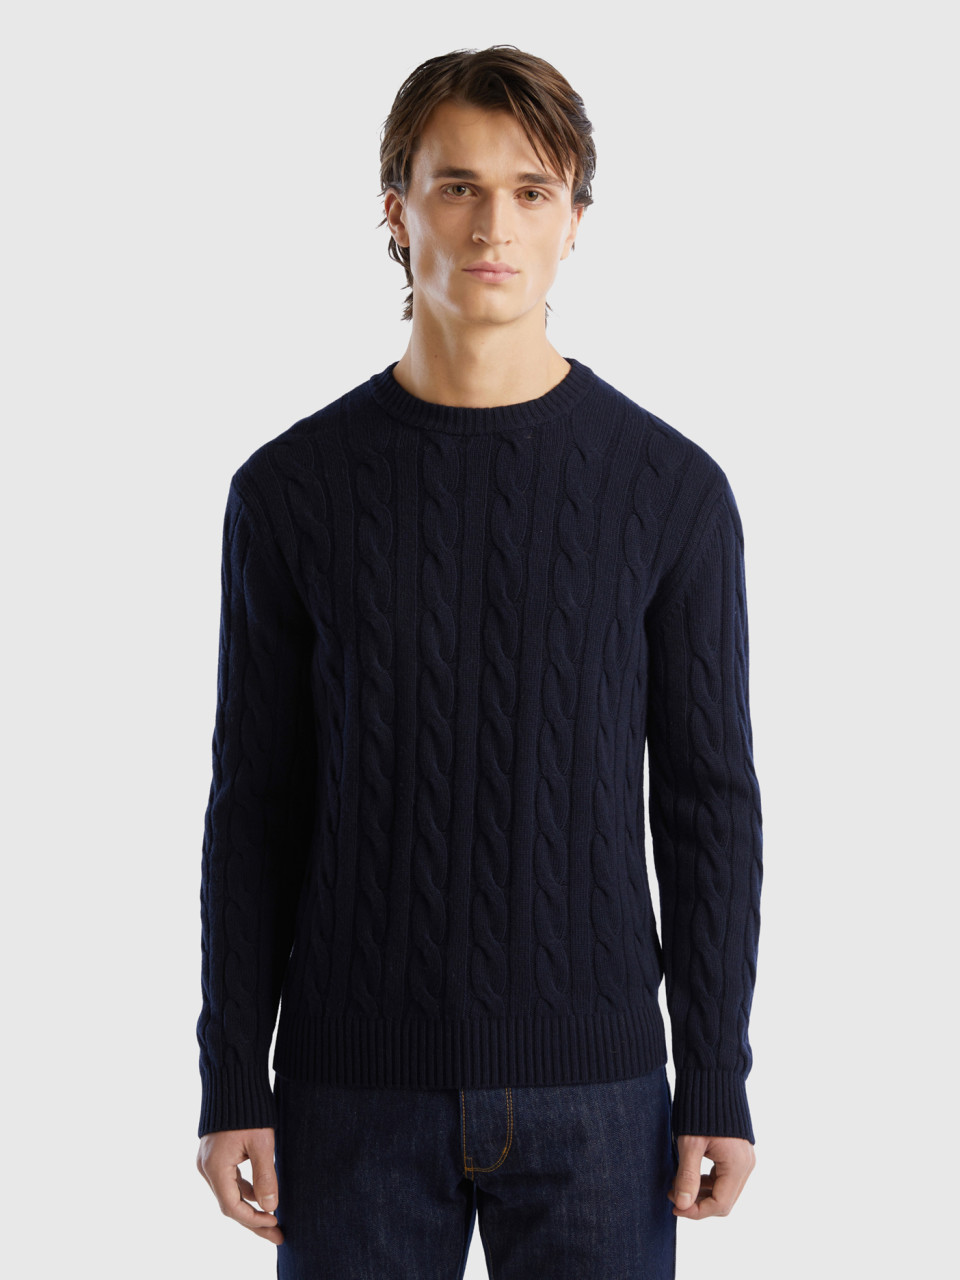 Benetton, Cable Knit Sweater In Cashmere Blend, Dark Blue, Men